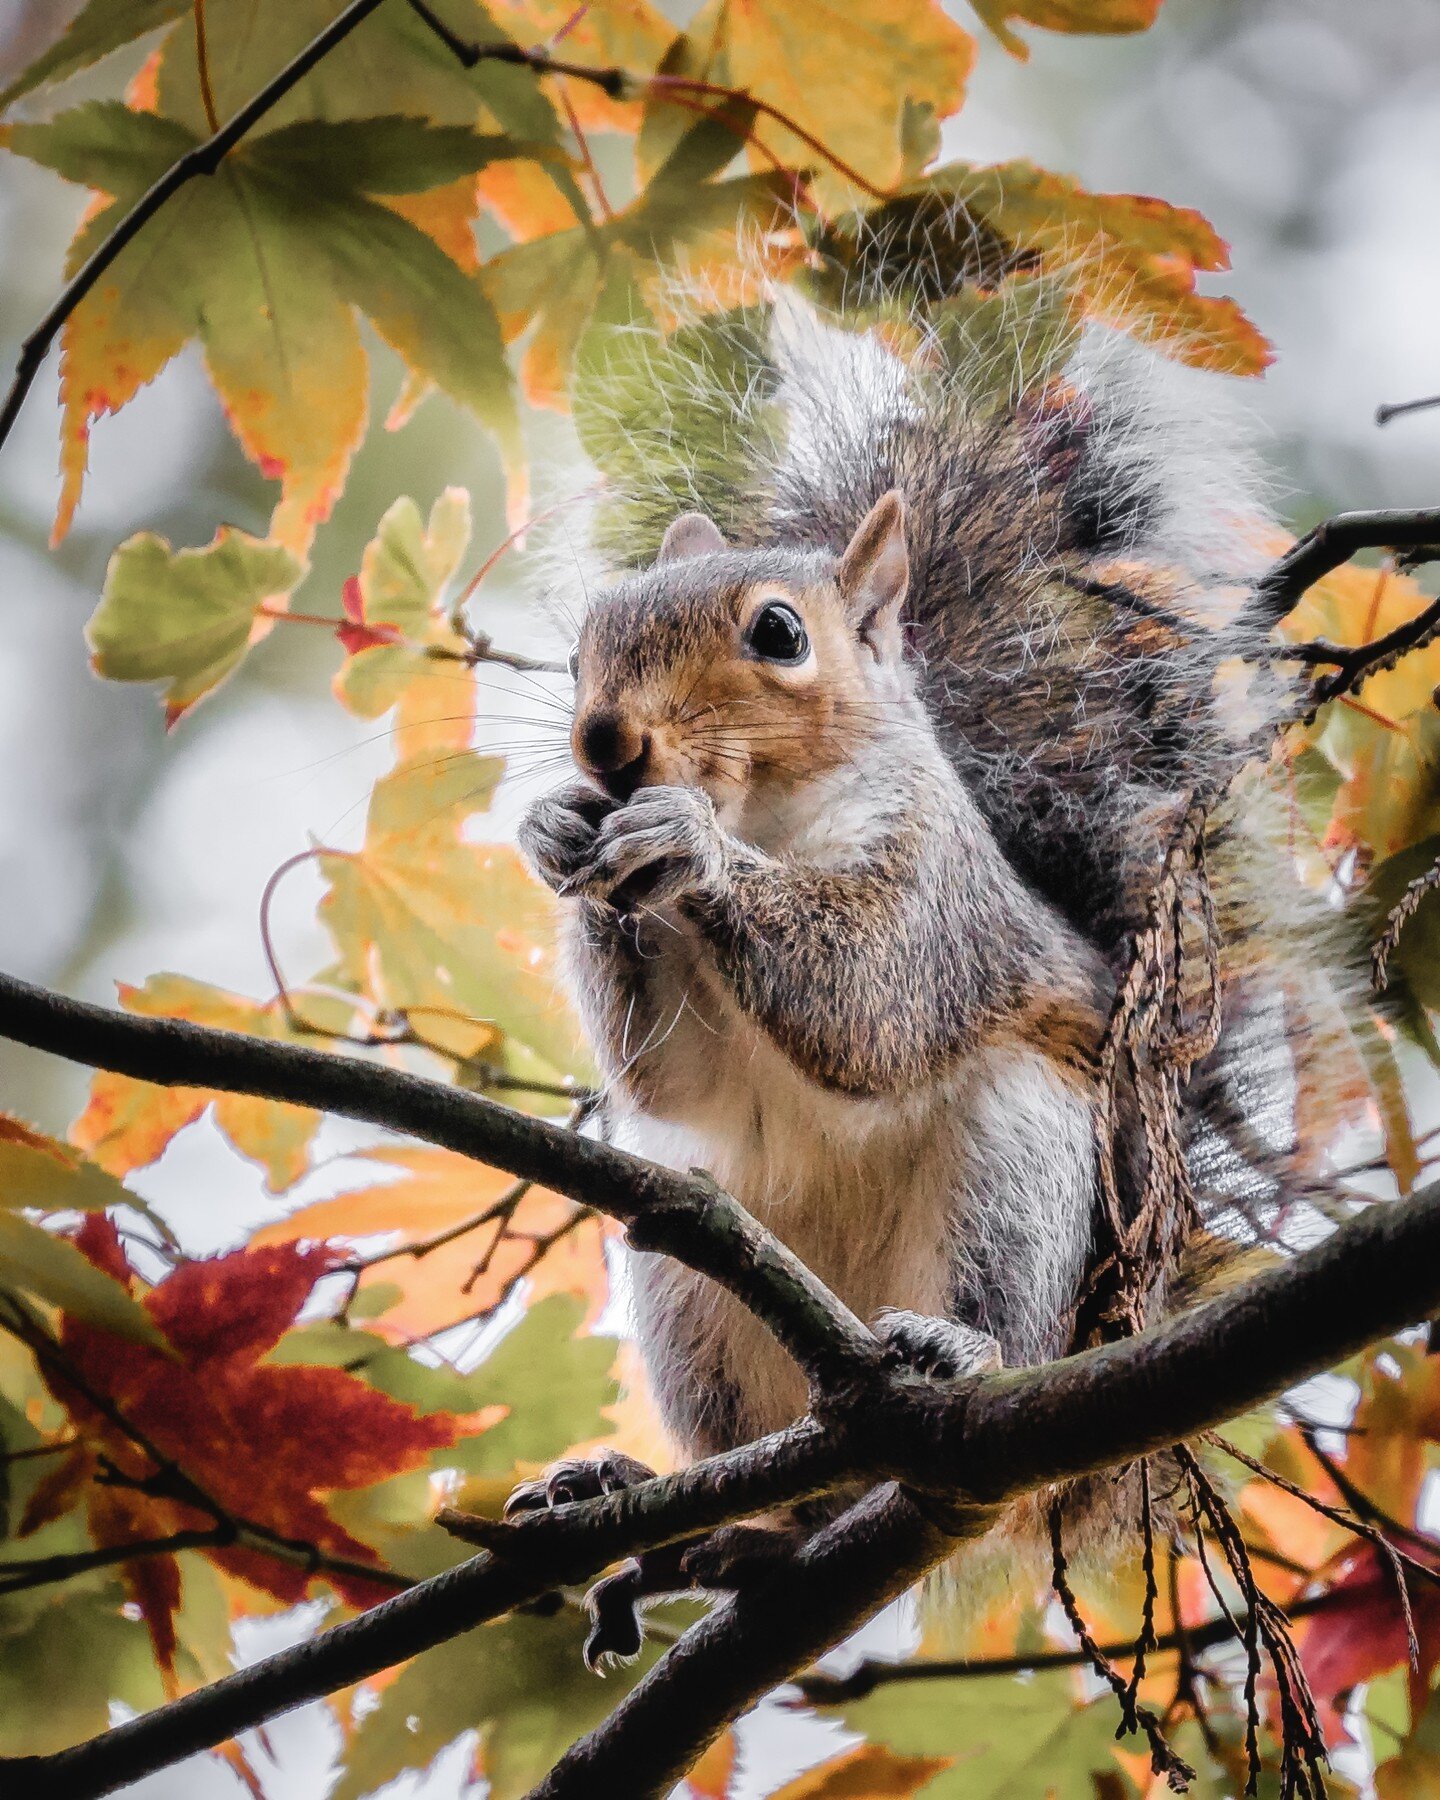 The squirrels are having a right binge on all the nuts at the minute!
-
-
-
-
-
-
#northwales 
#northwalestagram 
#northwalesinstagram 
#squirrel 
#squirrels 
#squirrelsofinstagram 
#fall 
#autumn 
#autumnvibes 
#nuts_about_squirrels 
#ukwildlife 
#u